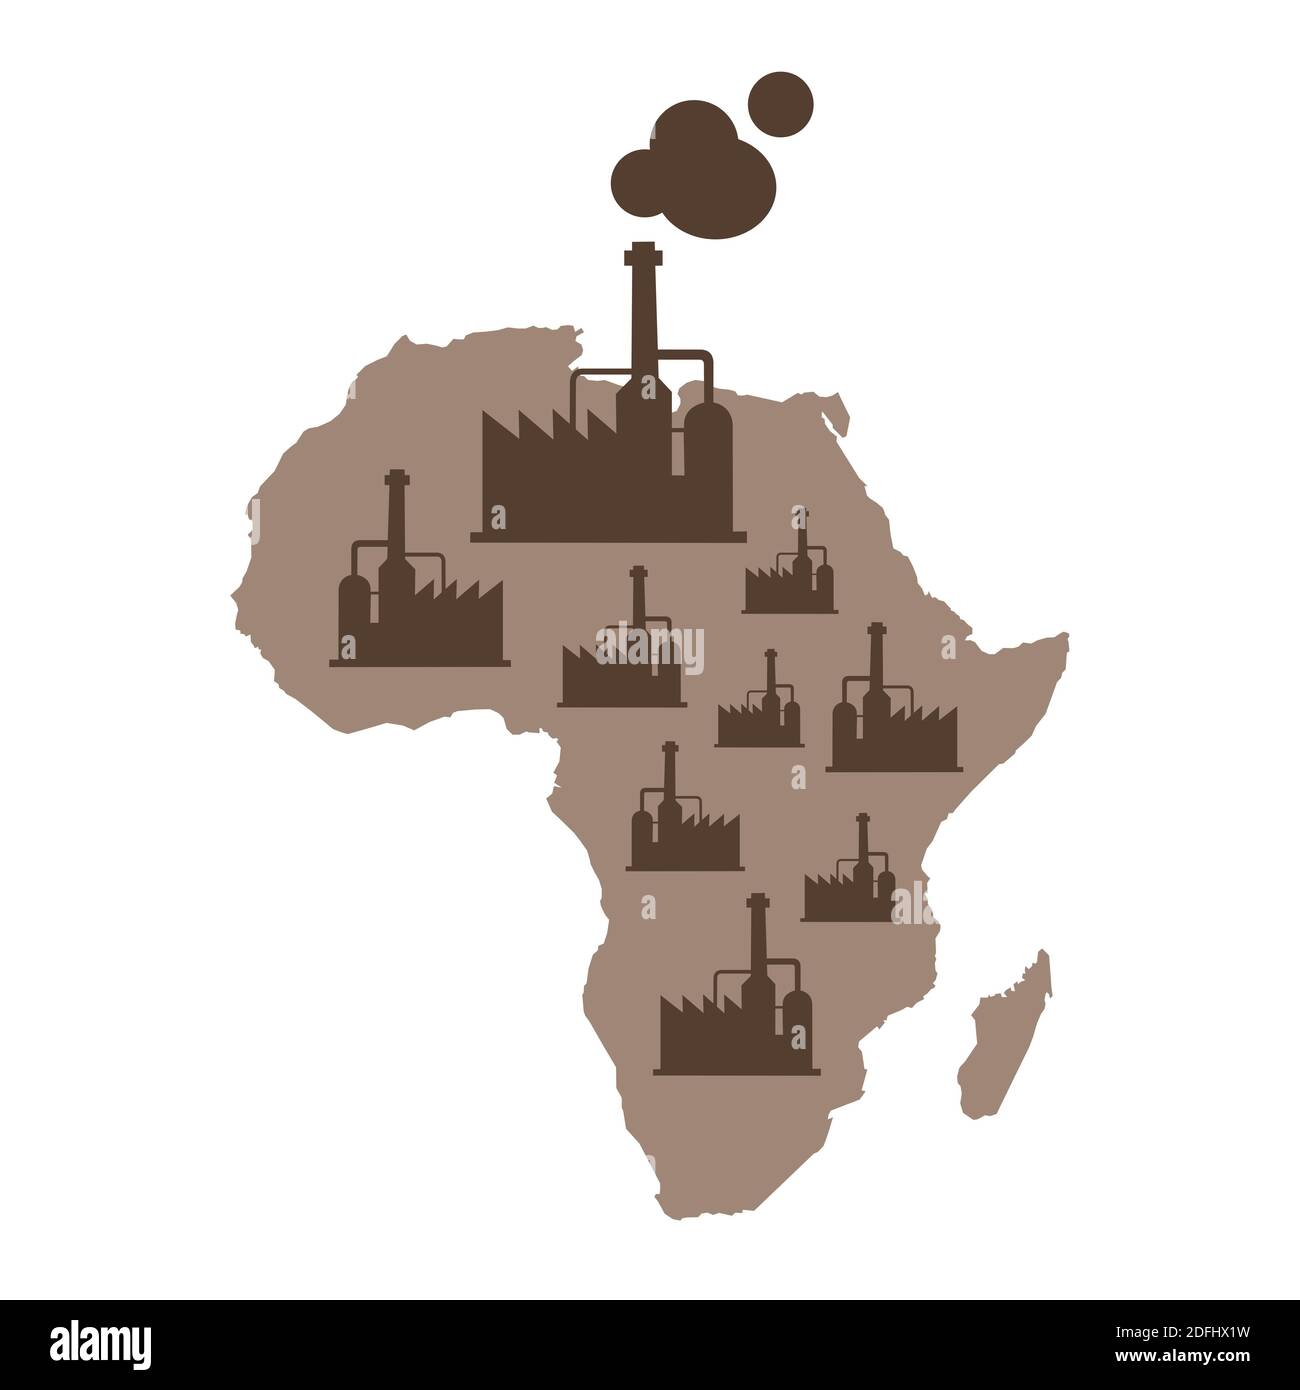 Industry and factory in Africa. Production, work, and manufacturing - industrialization of African continent. Vector illustration Stock Photo